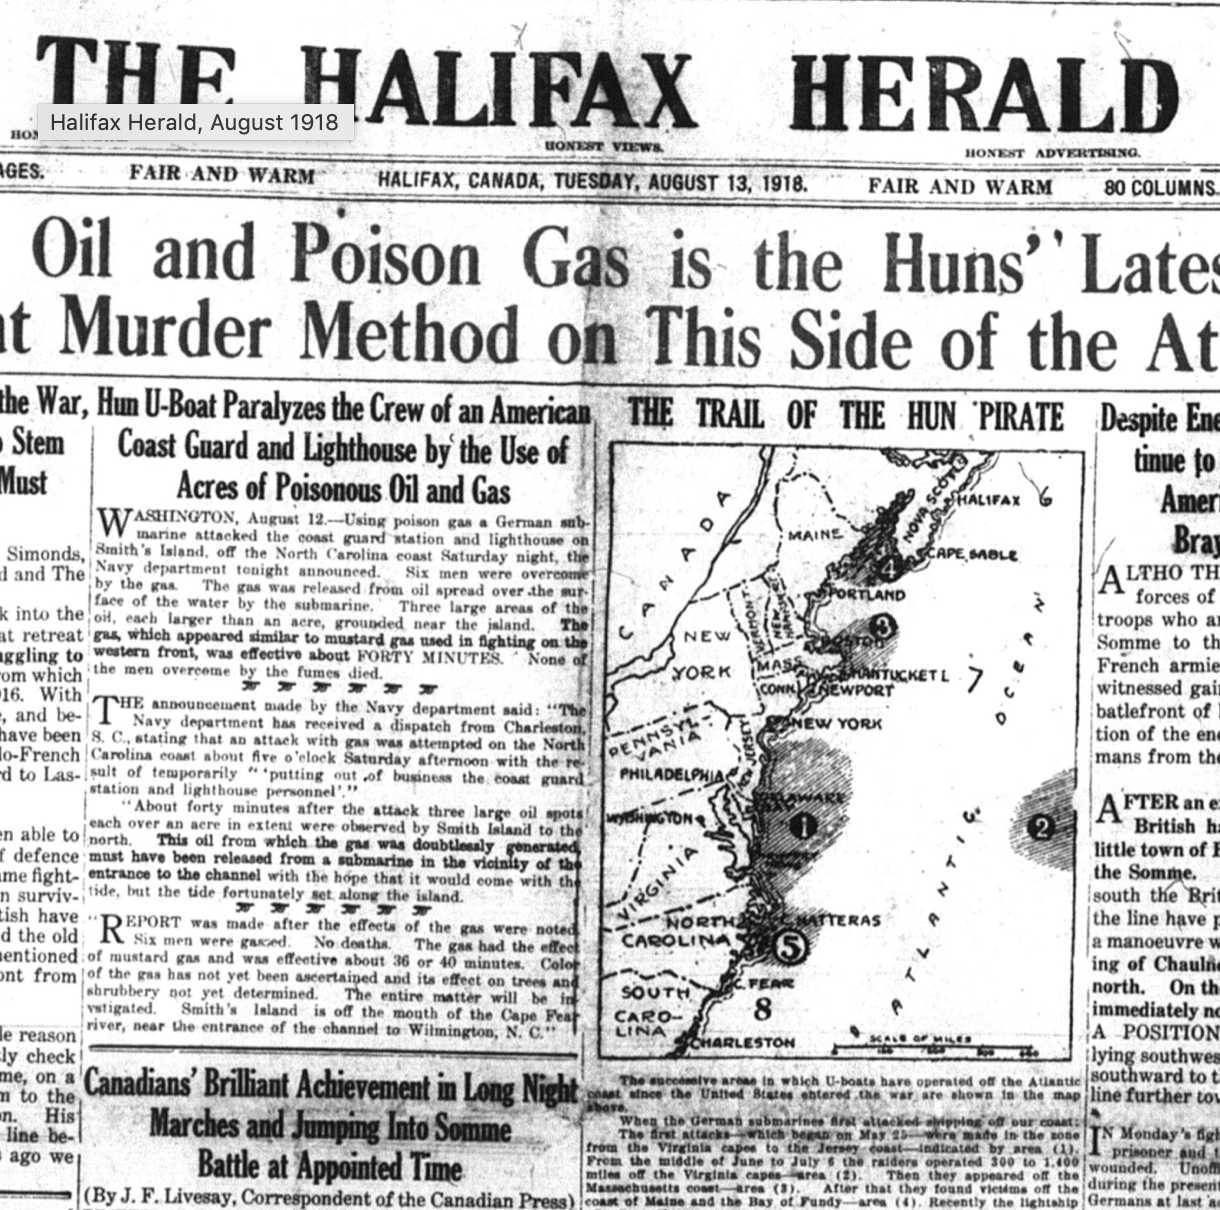 Front page of an English language newspaper, the Halifax Herald. A small map shows the path of German U-boats along the east coasts of the USA and Canada. Relevant headlines have been transposed.